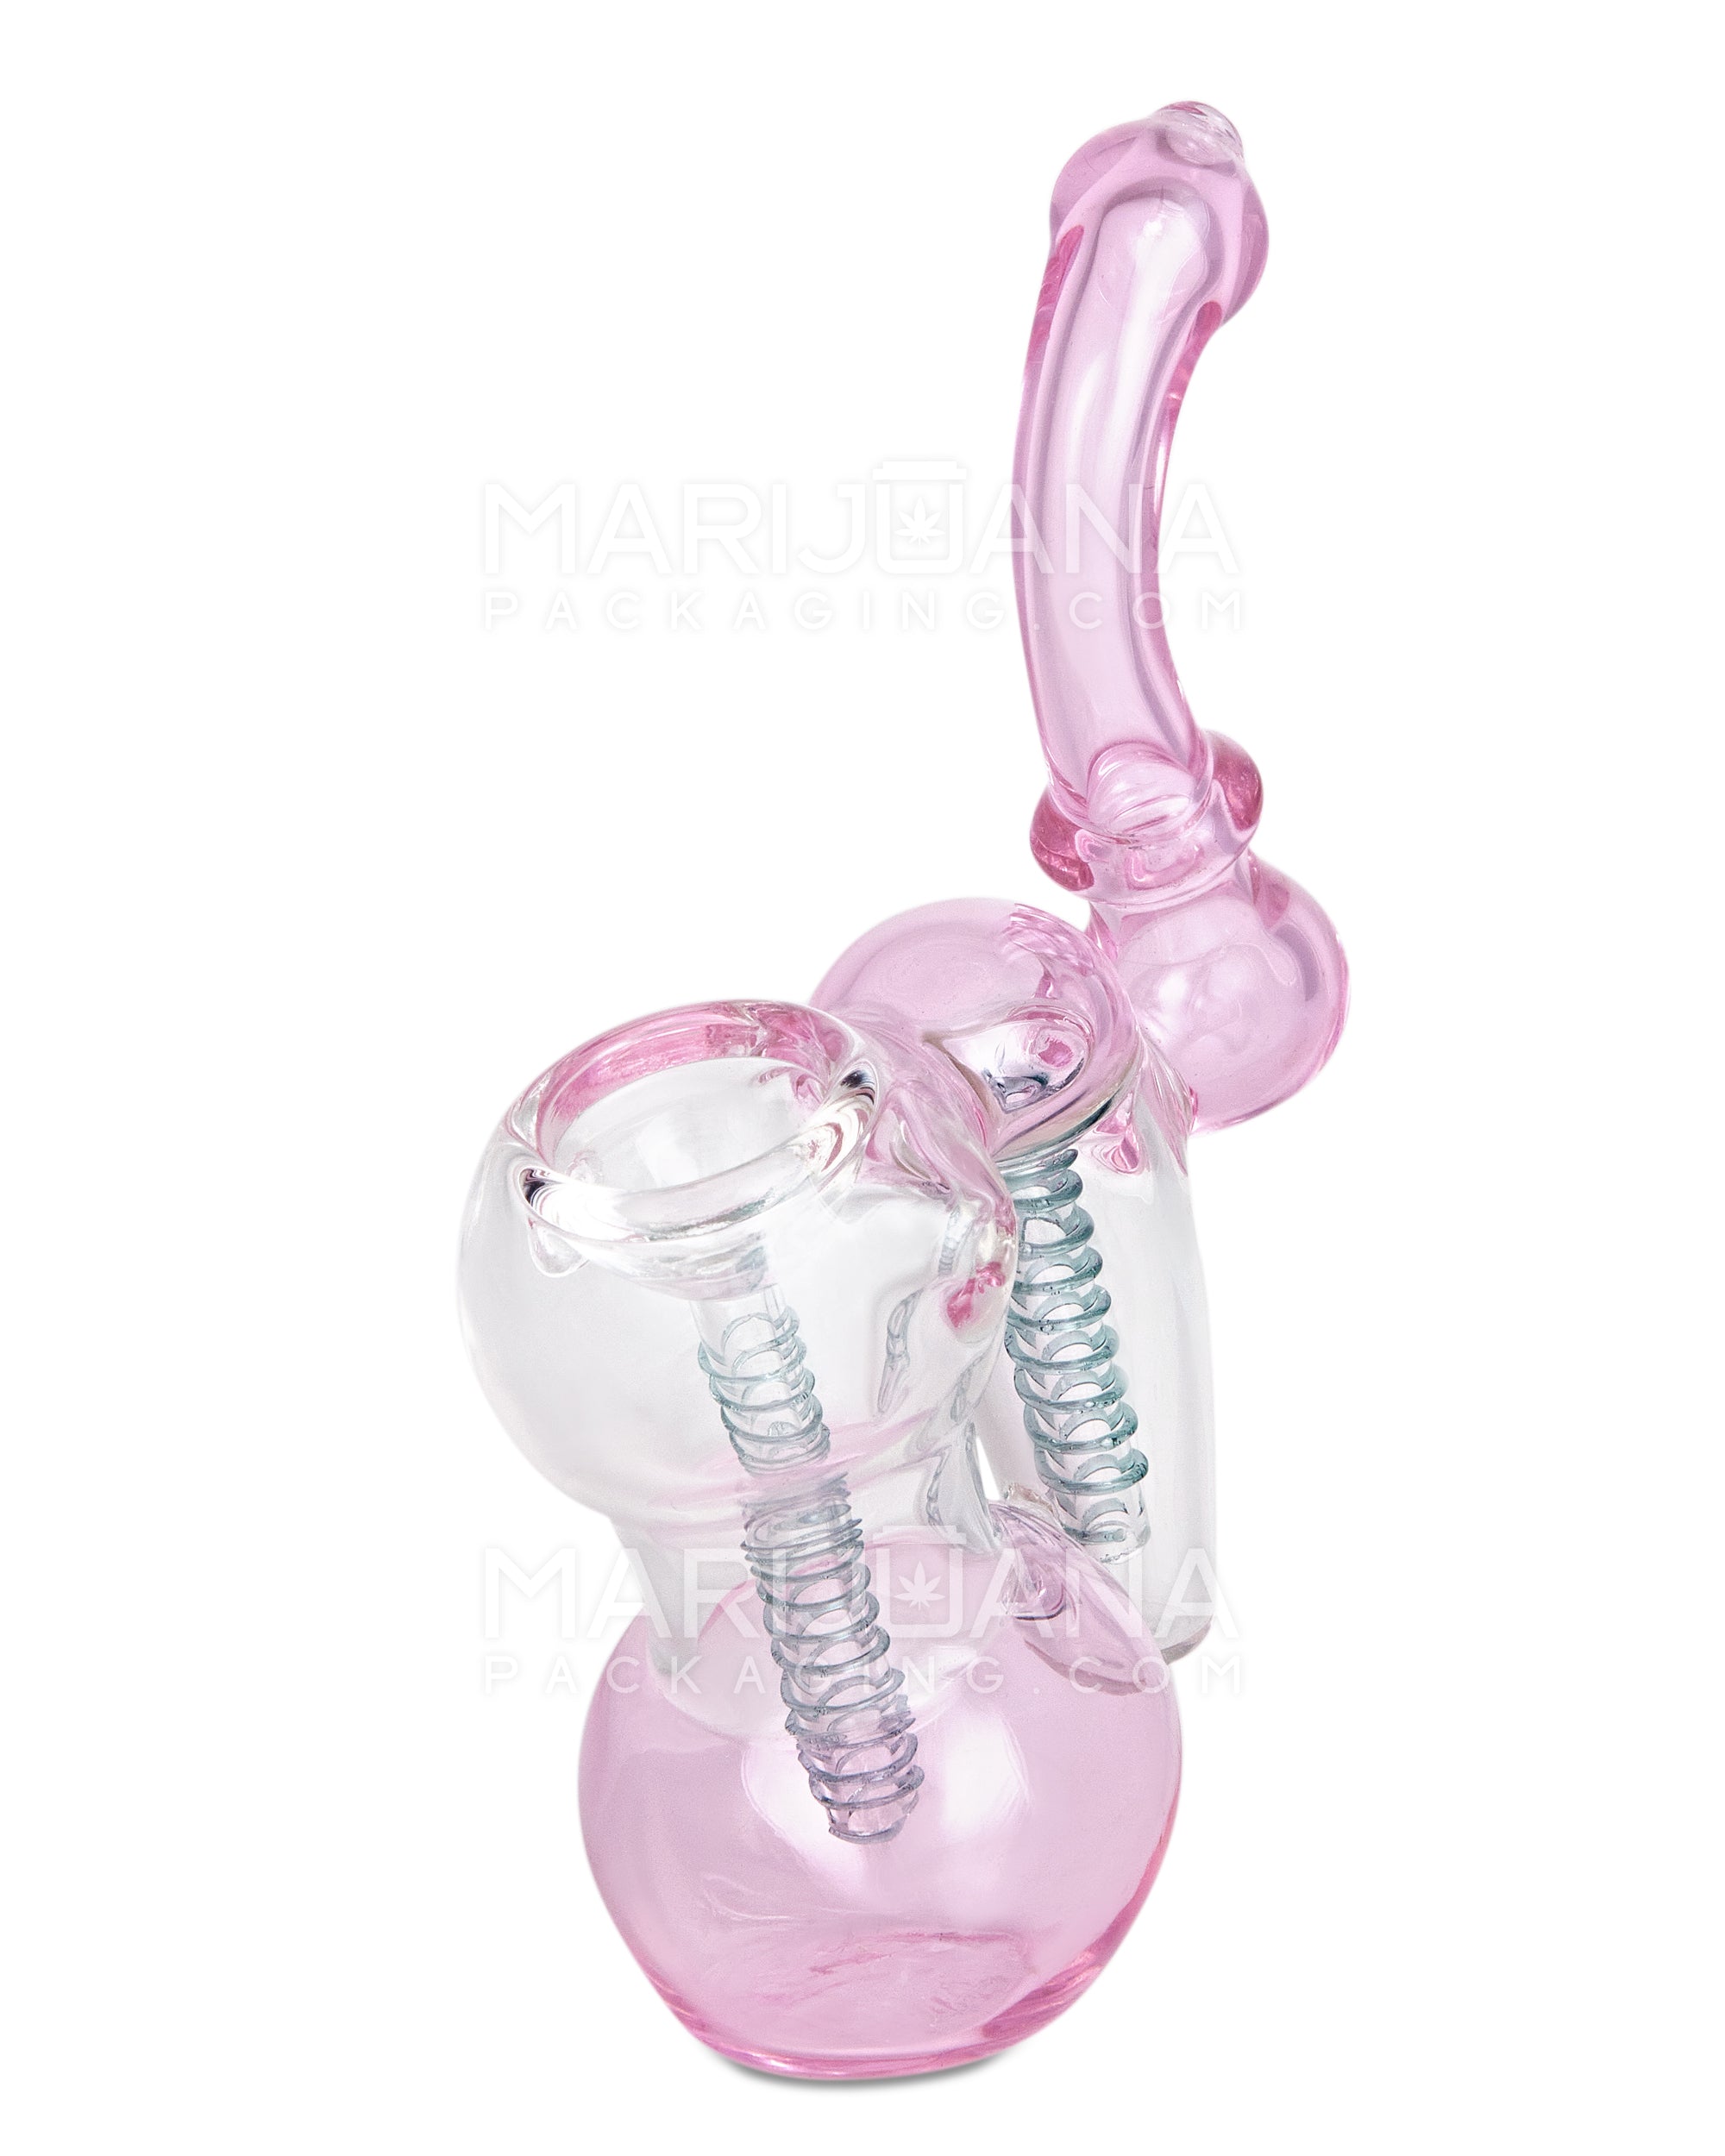 Ringed Double Chamber Bubbler w/ Multi Knockers | 7.5in Tall - Glass - Pink - 7